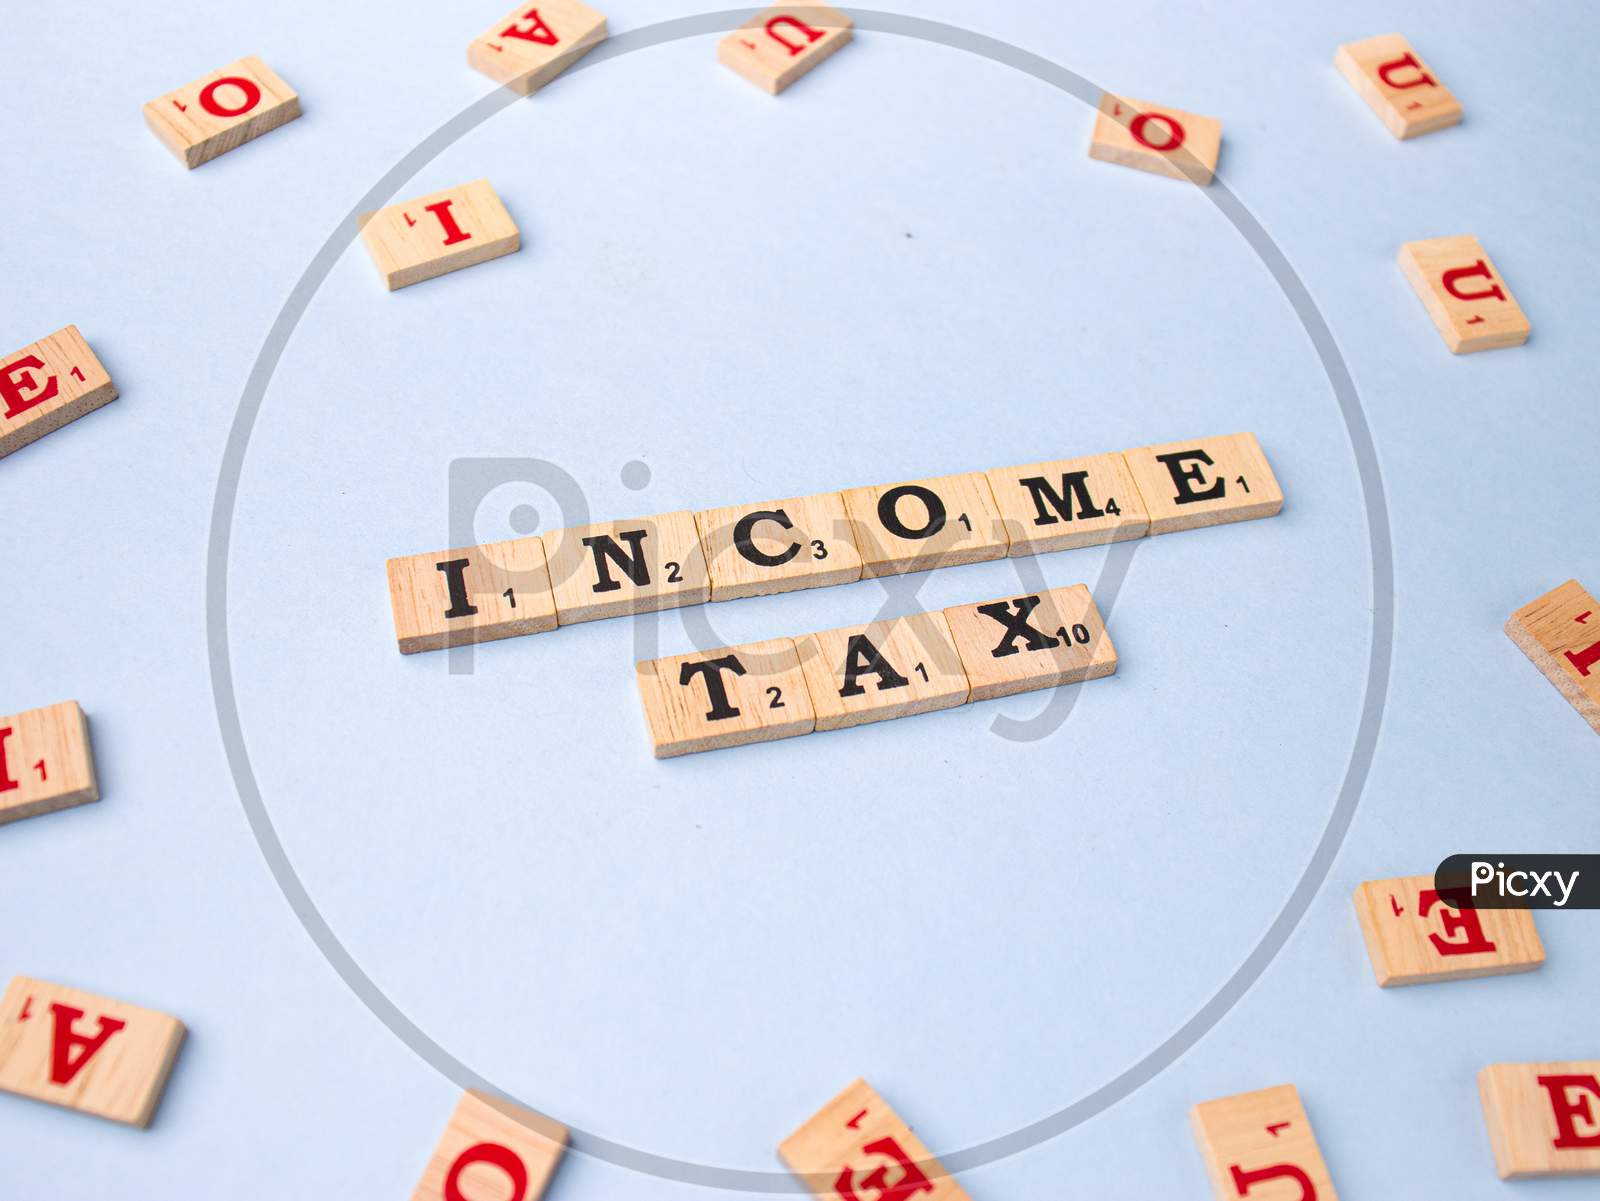 Assam, india - March 30, 2021 : Word INCOME TAX written on wooden cubes stock image.